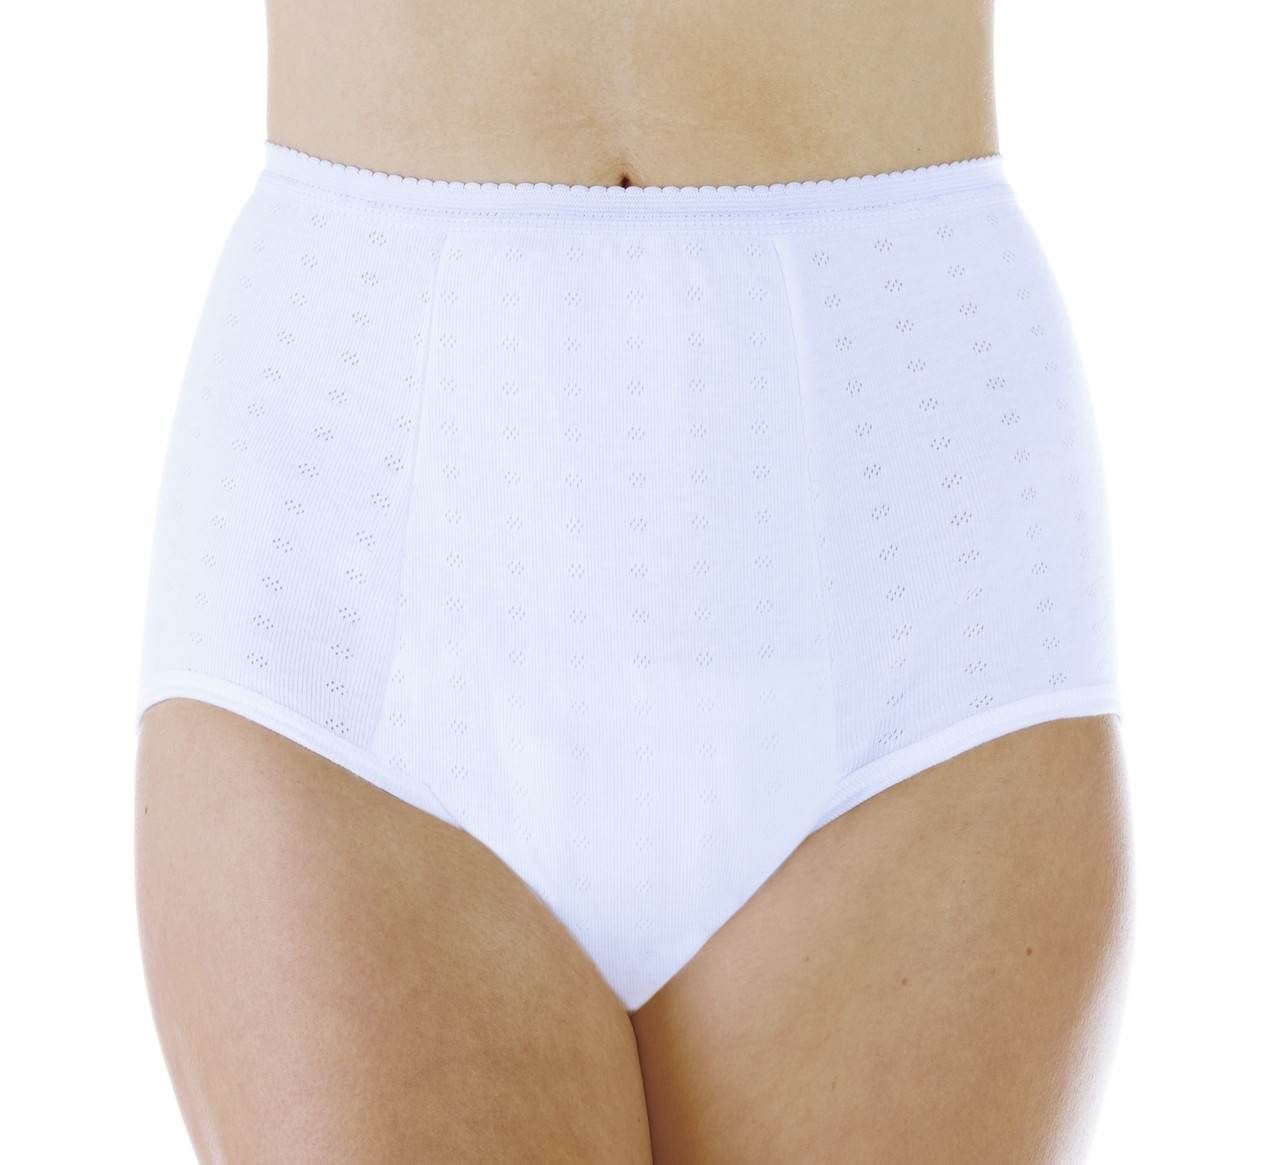 Leak Proof Panties for Women Incontinence Washable Plus Size - Breathable  Comfortable and Leak-proof Physiological Pants Plus Size S-6XL(5-Packs) -  Walmart.com